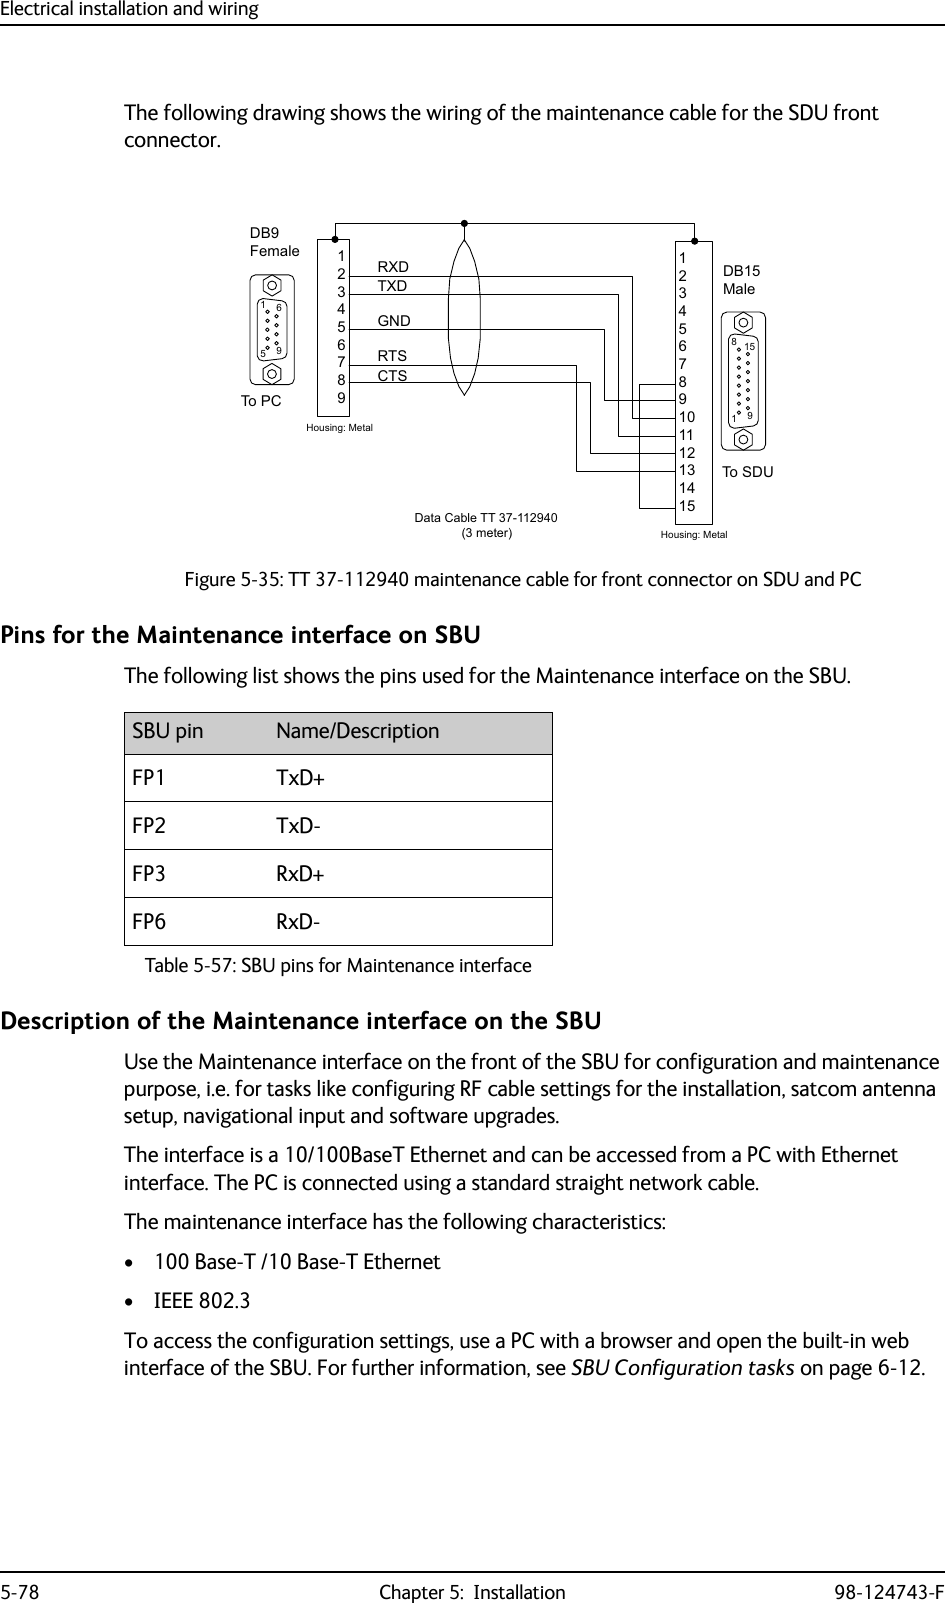 Electrical installation and wiring5-78 Chapter 5:  Installation 98-124743-FThe following drawing shows the wiring of the maintenance cable for the SDU front connector.Pins for the Maintenance interface on SBUThe following list shows the pins used for the Maintenance interface on the SBU.Description of the Maintenance interface on the SBUUse the Maintenance interface on the front of the SBU for configuration and maintenance purpose, i.e. for tasks like configuring RF cable settings for the installation, satcom antenna setup, navigational input and software upgrades. The interface is a 10/100BaseT Ethernet and can be accessed from a PC with Ethernet interface. The PC is connected using a standard straight network cable.The maintenance interface has the following characteristics:• 100 Base-T /10 Base-T Ethernet• IEEE 802.3To access the configuration settings, use a PC with a browser and open the built-in web interface of the SBU. For further information, see SBU Configuration tasks on page 6-12.Figure 5-35: TT 37-112940 maintenance cable for front connector on SDU and PC&apos;%0DOH&apos;%)HPDOH*1&apos;5;&apos;7;&apos;&amp;76576+RXVLQJ0HWDO+RXVLQJ0HWDO&apos;DWD&amp;DEOH77PHWHU7R3&amp;7R6&apos;8SBU pin Name/DescriptionFP1 TxD+FP2 TxD-FP3 RxD+FP6 RxD-Table 5-57: SBU pins for Maintenance interface